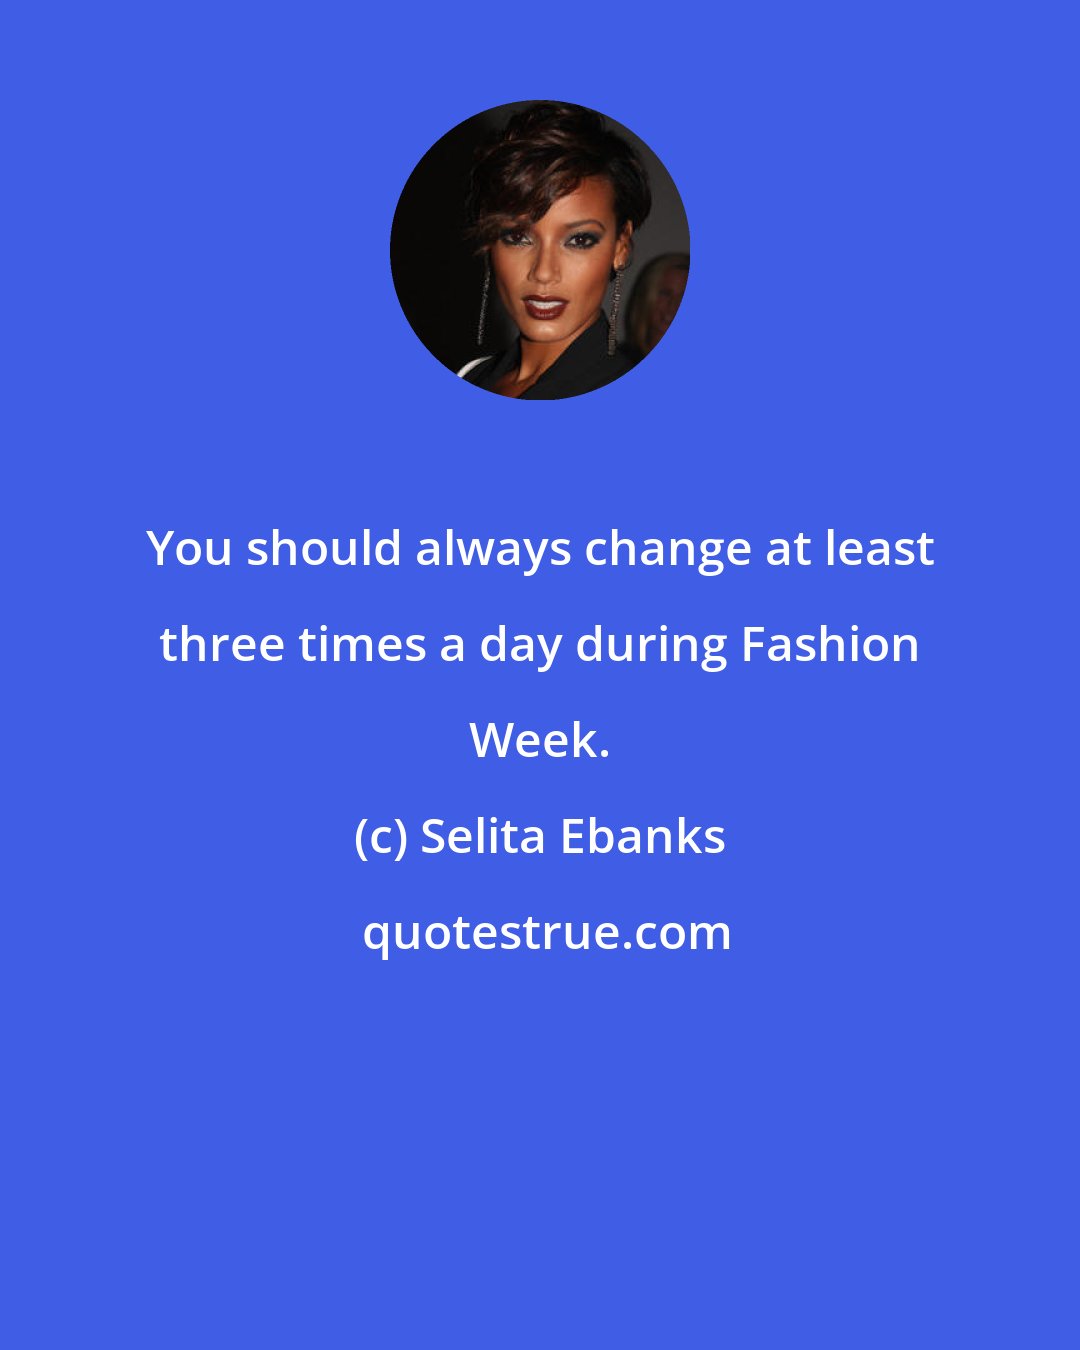 Selita Ebanks: You should always change at least three times a day during Fashion Week.